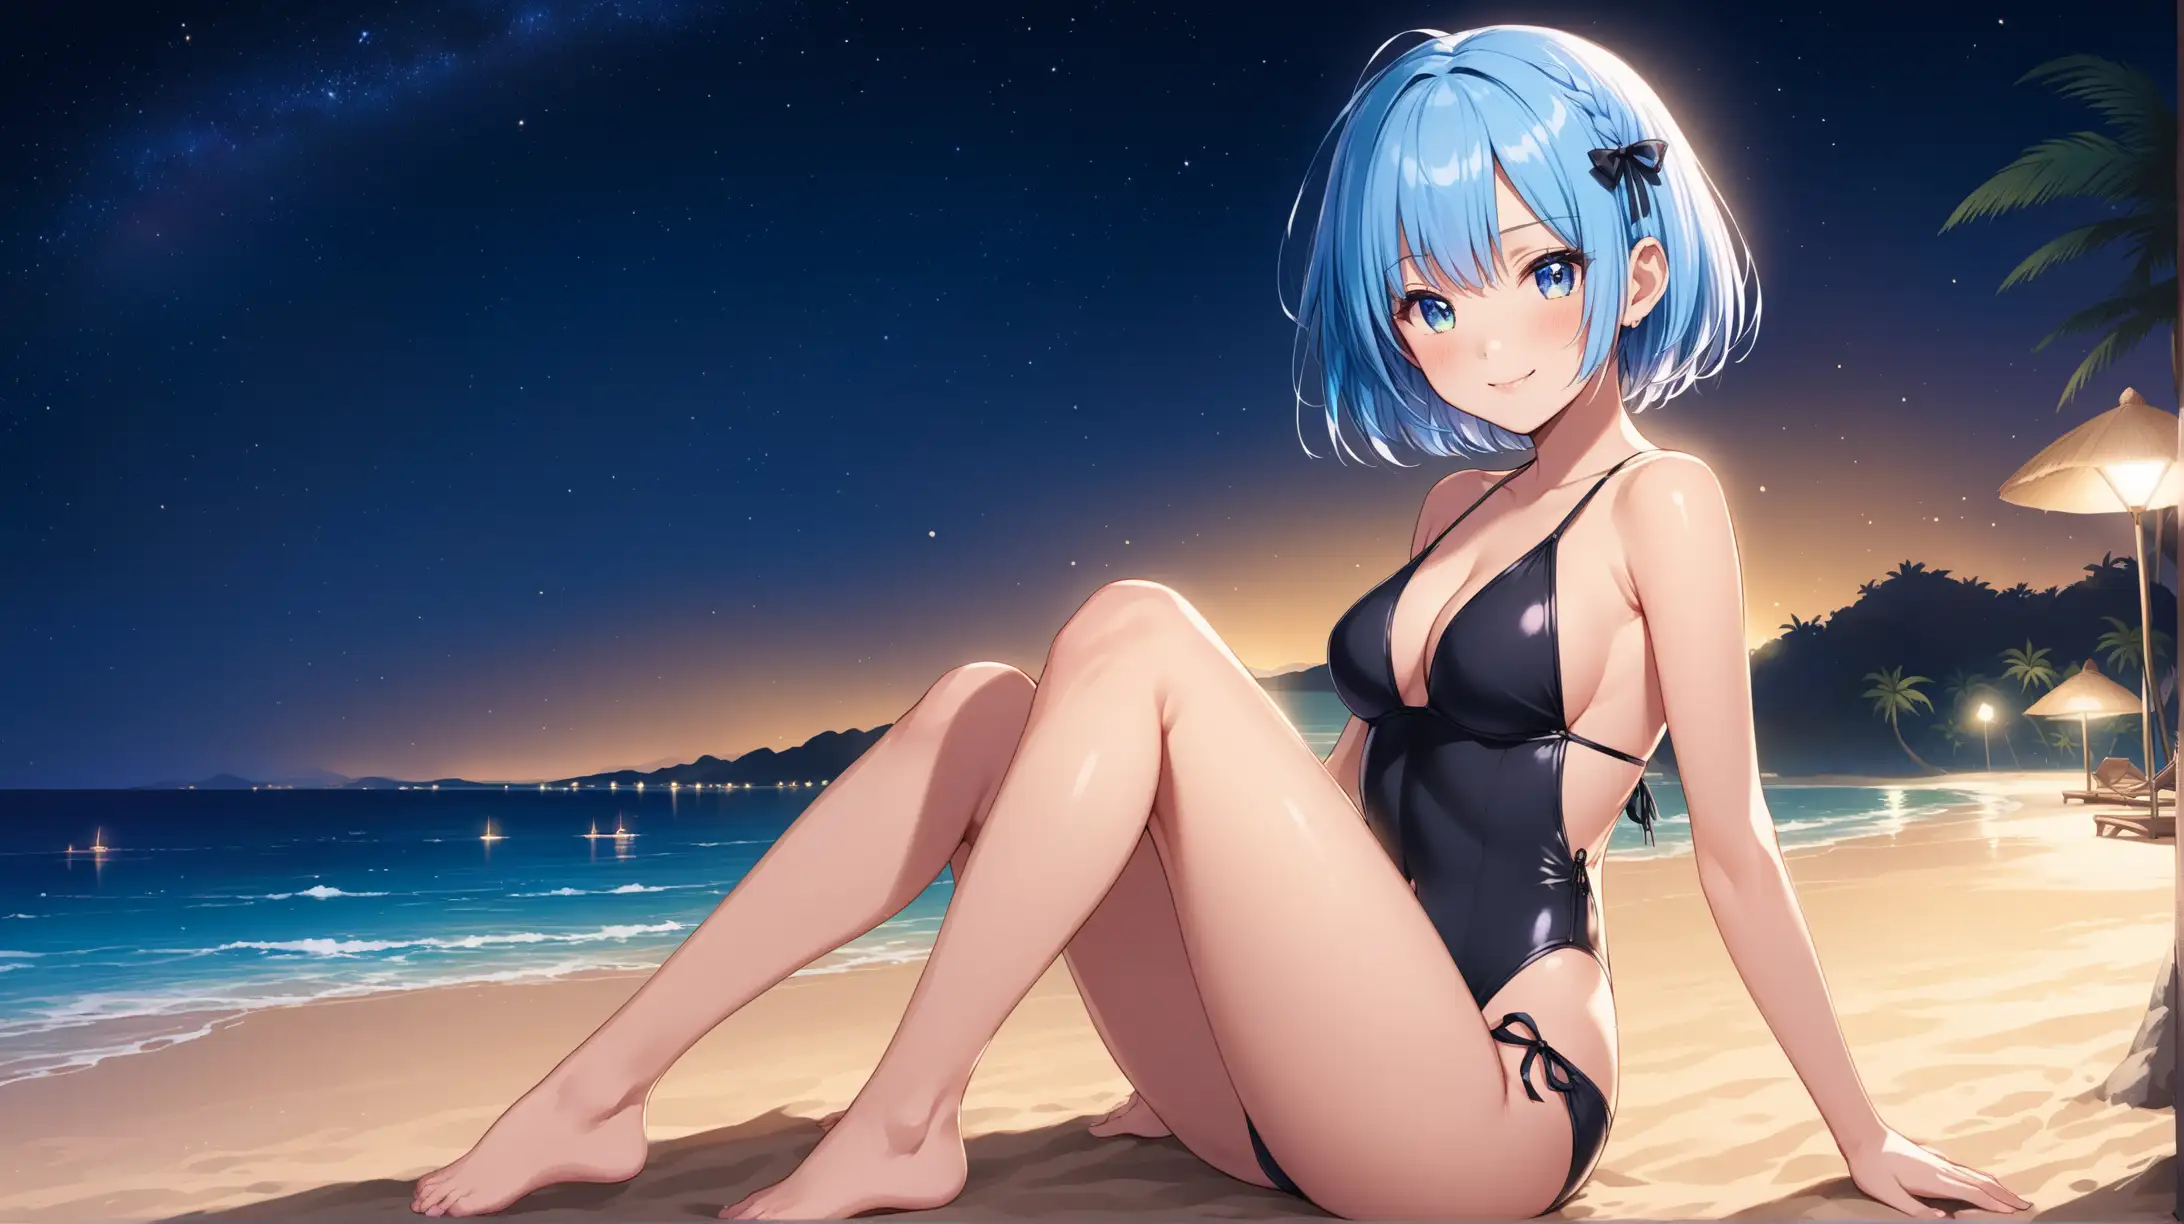 Draw the character Rem, high quality, sitting in a captivating pose, alone at the beach, at night, wearing a swimsuit, she is smiling at the viewer